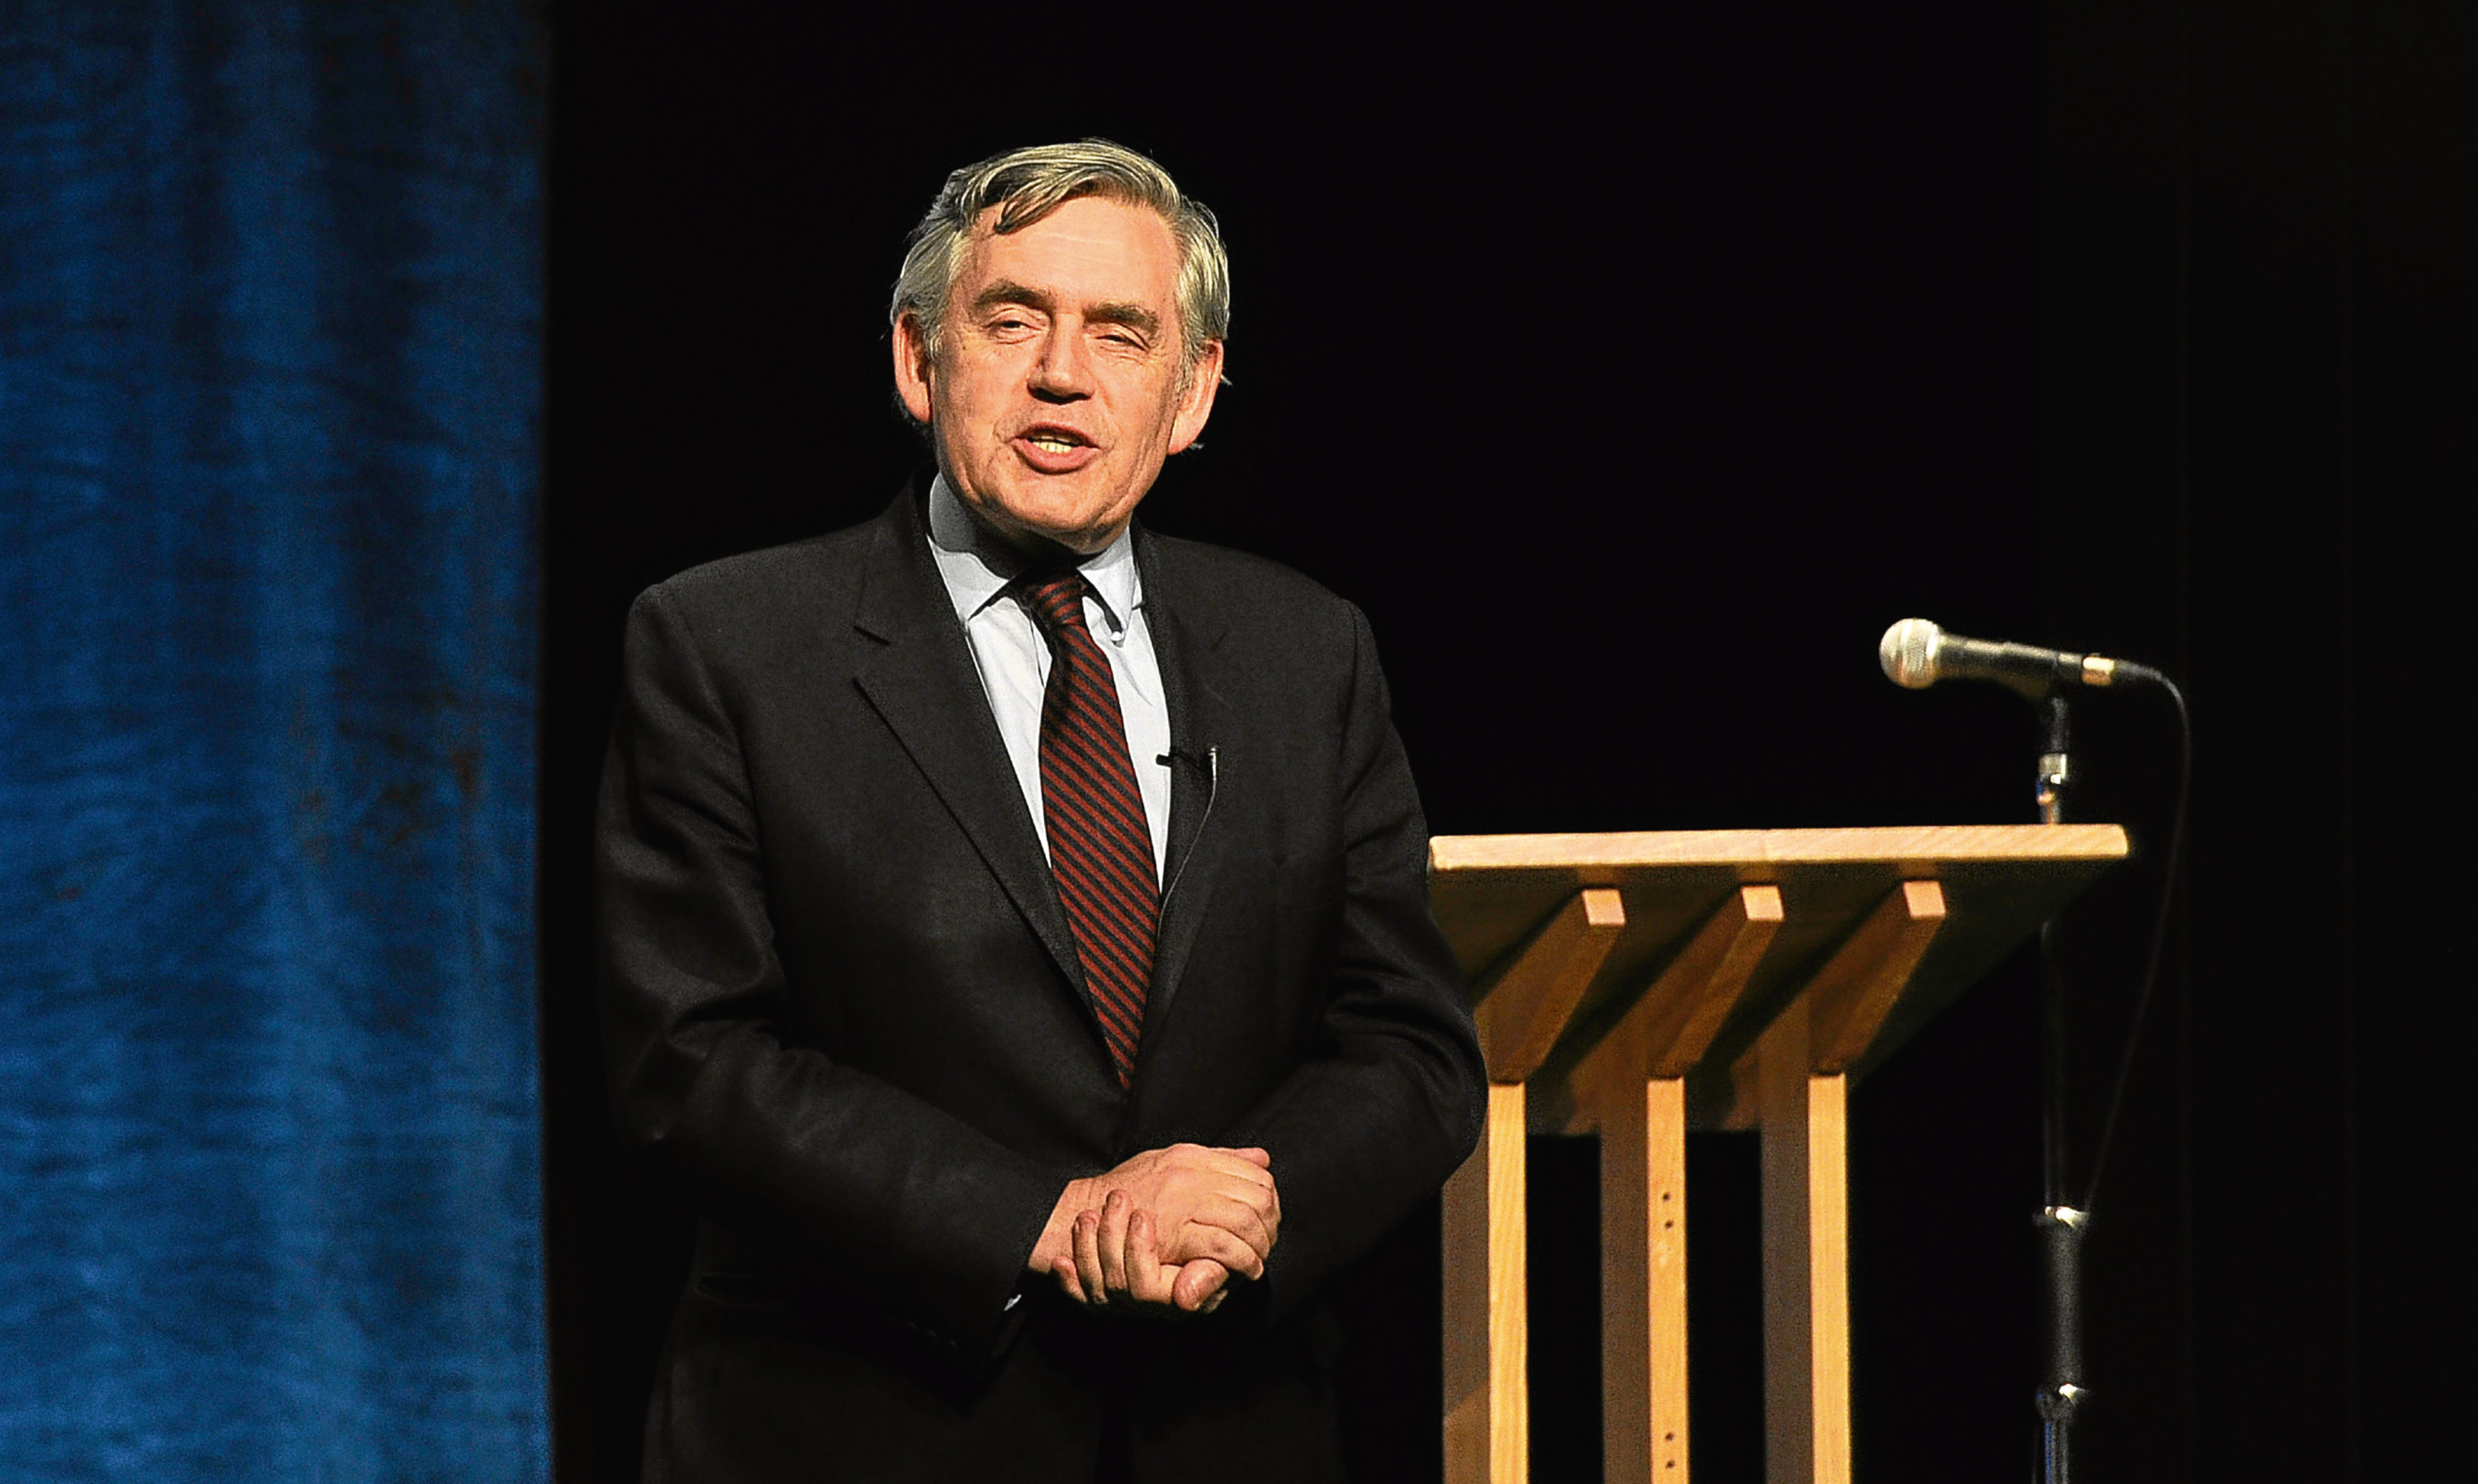 Gordon Brown has claimed that Scotland is at risk of becoming "one of the west's most divided countries".